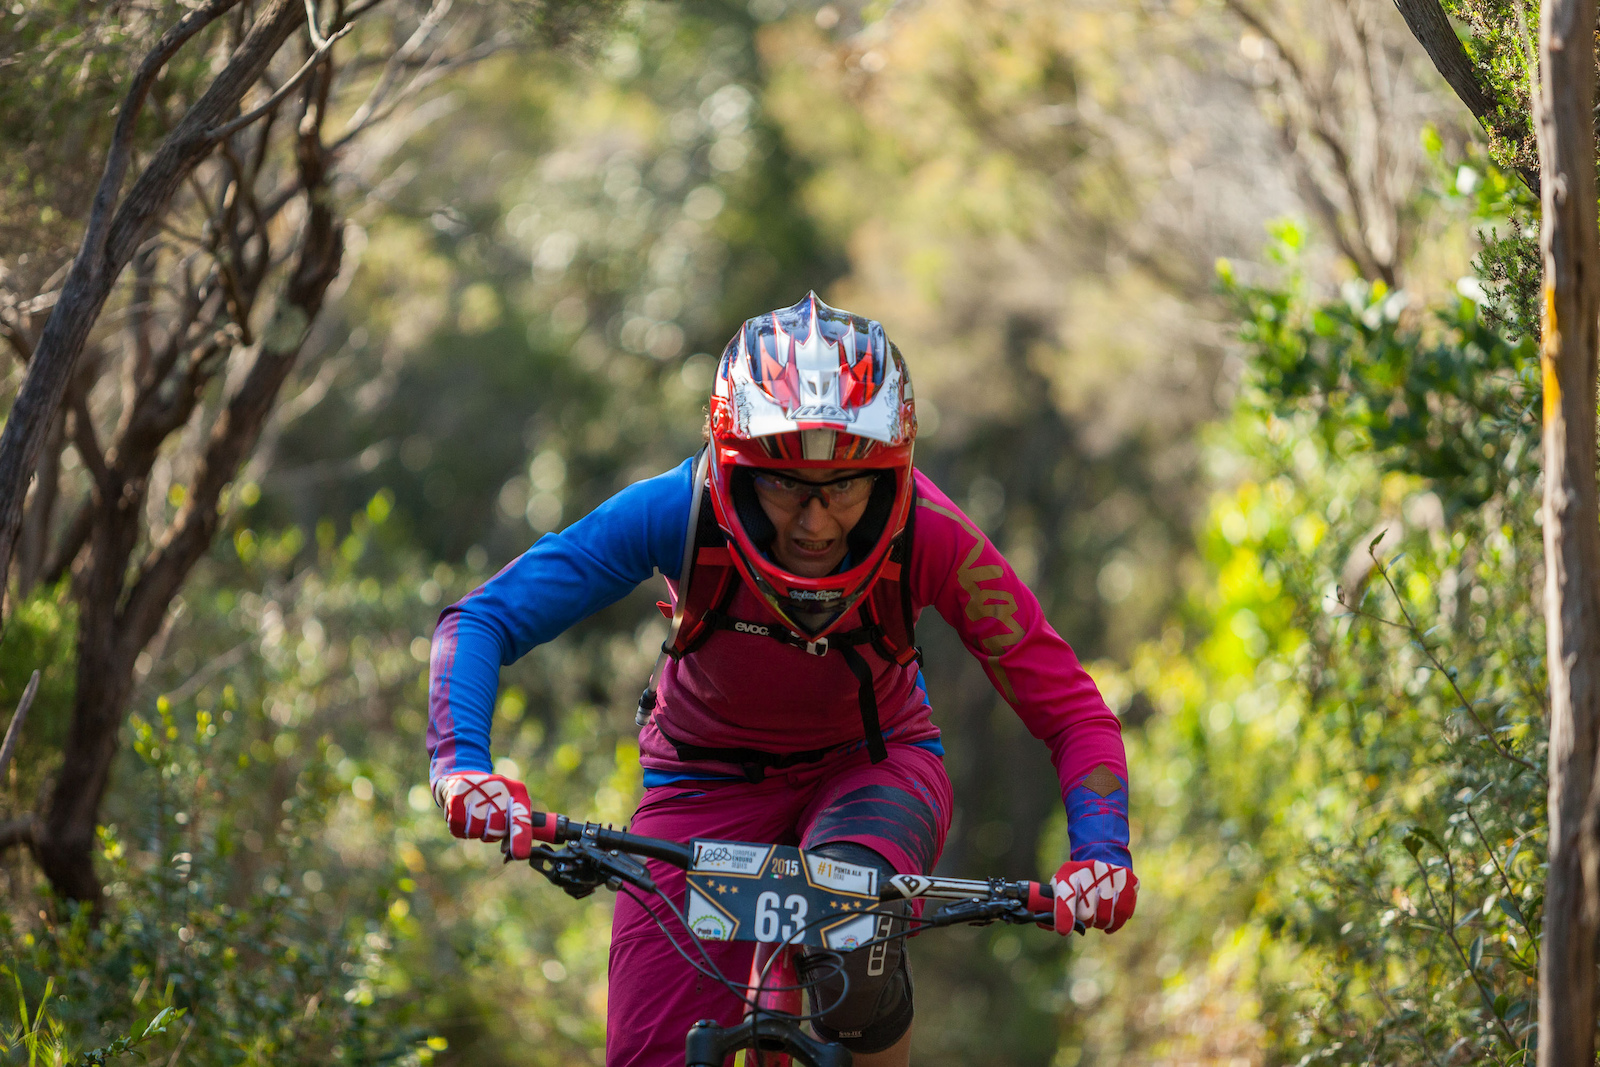 Steffi Teltscher races down the prologue during the first stop of the European Enduro Series in Punta Ala, Itali, on April 25, 2015. Free image for editorial usage only: Photo by Antonio Lopez Ordonez.